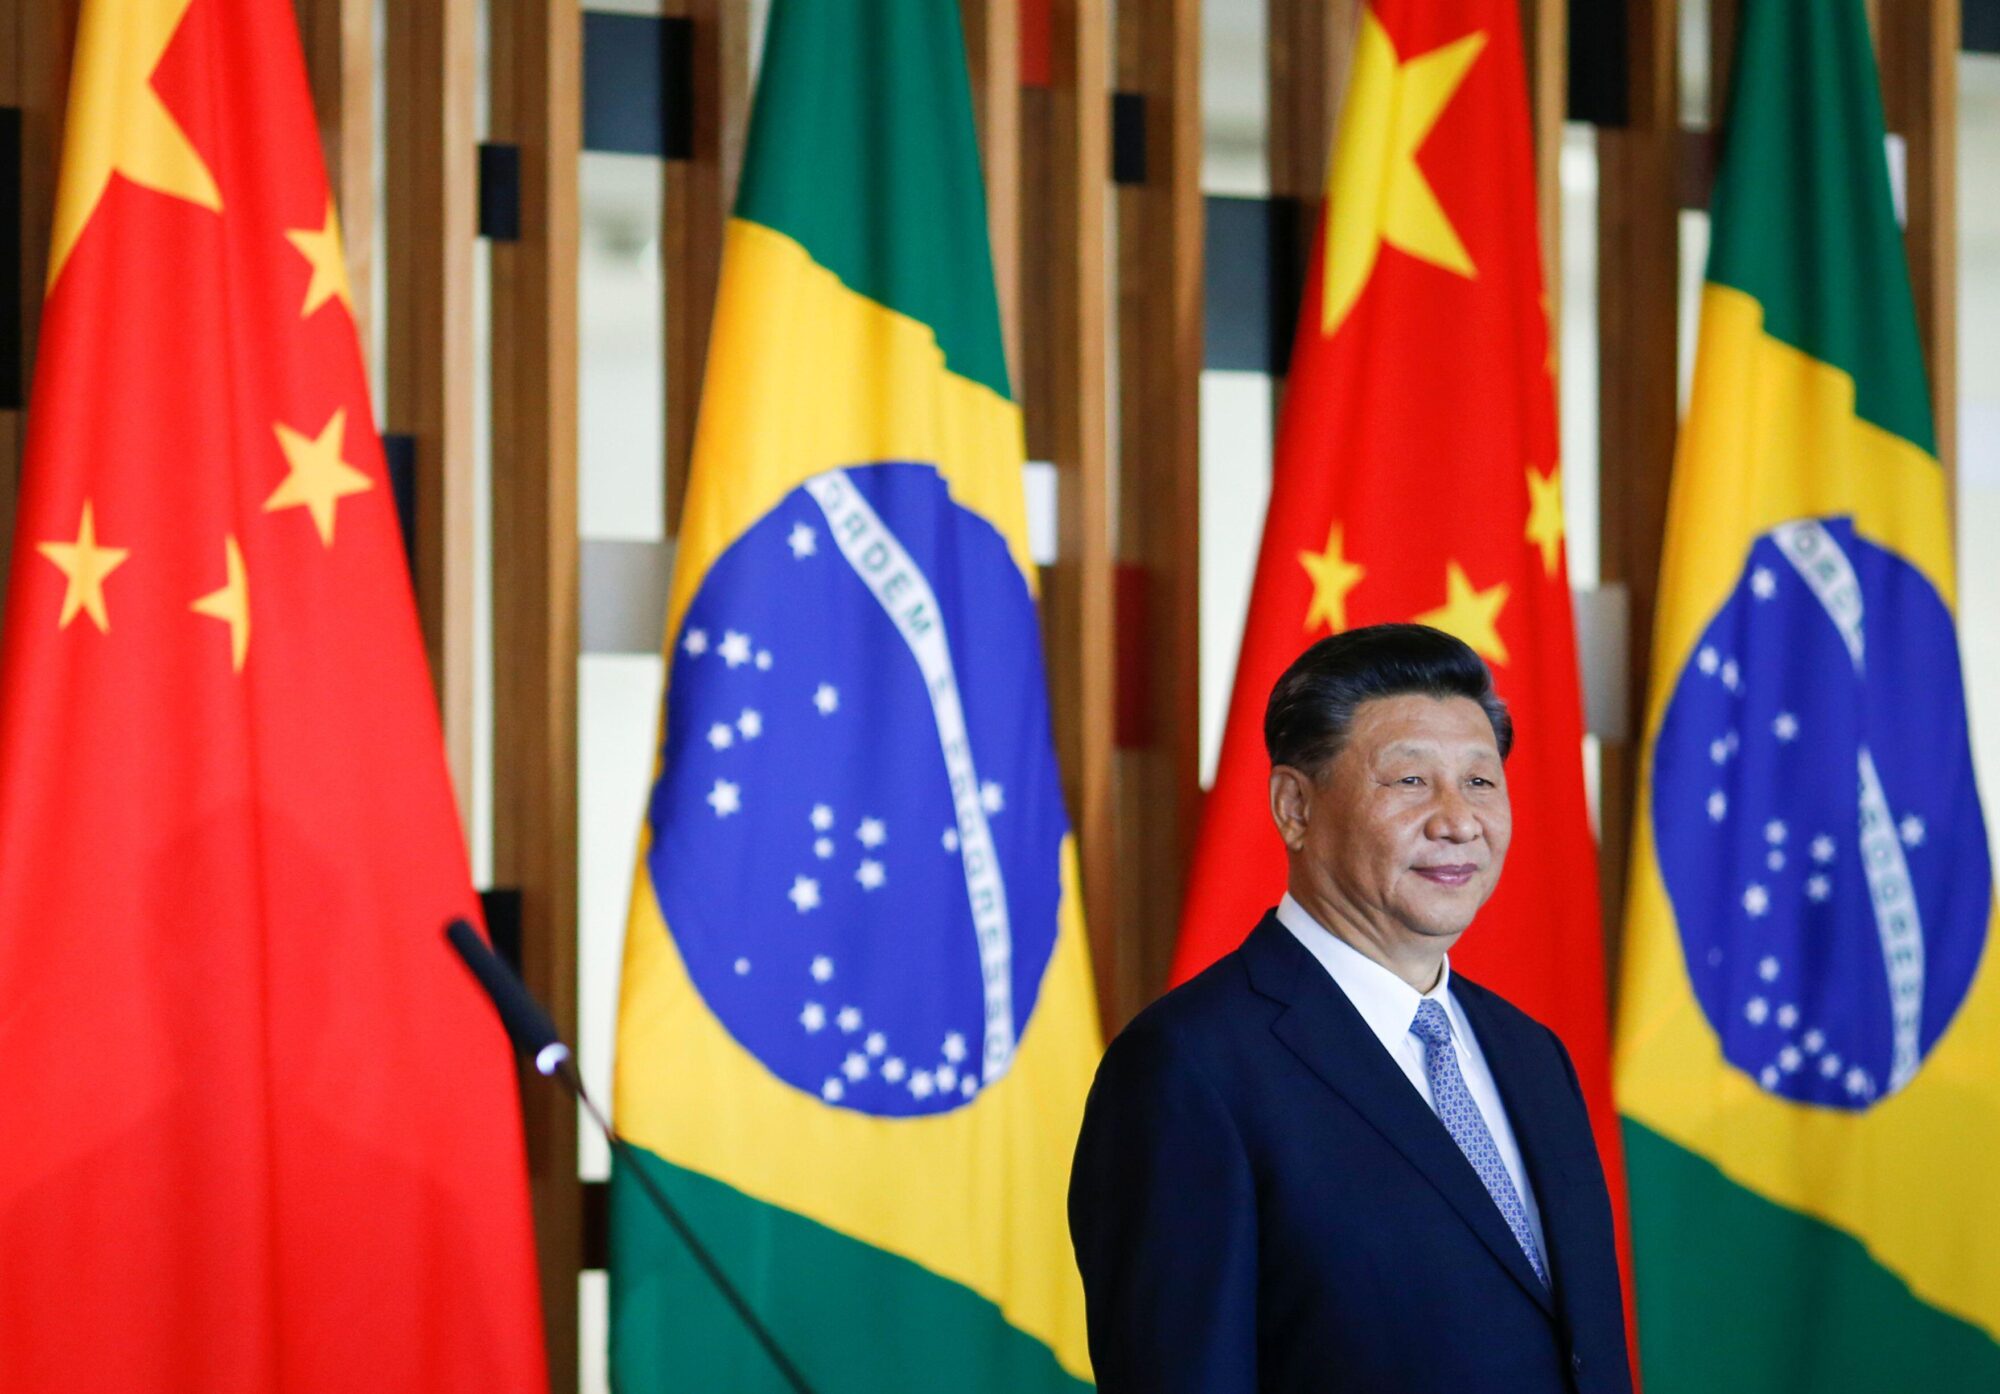 <p>President Xi Jinping at a bilateral event between Brazil and China during the BRICS Summit in Brasilia, November 2019. Regardless of who wins the October presidential elections in Brazil, bilateral trade is expected to continue to grow (Image: Ueslei Marcelino / Alamy)</p>